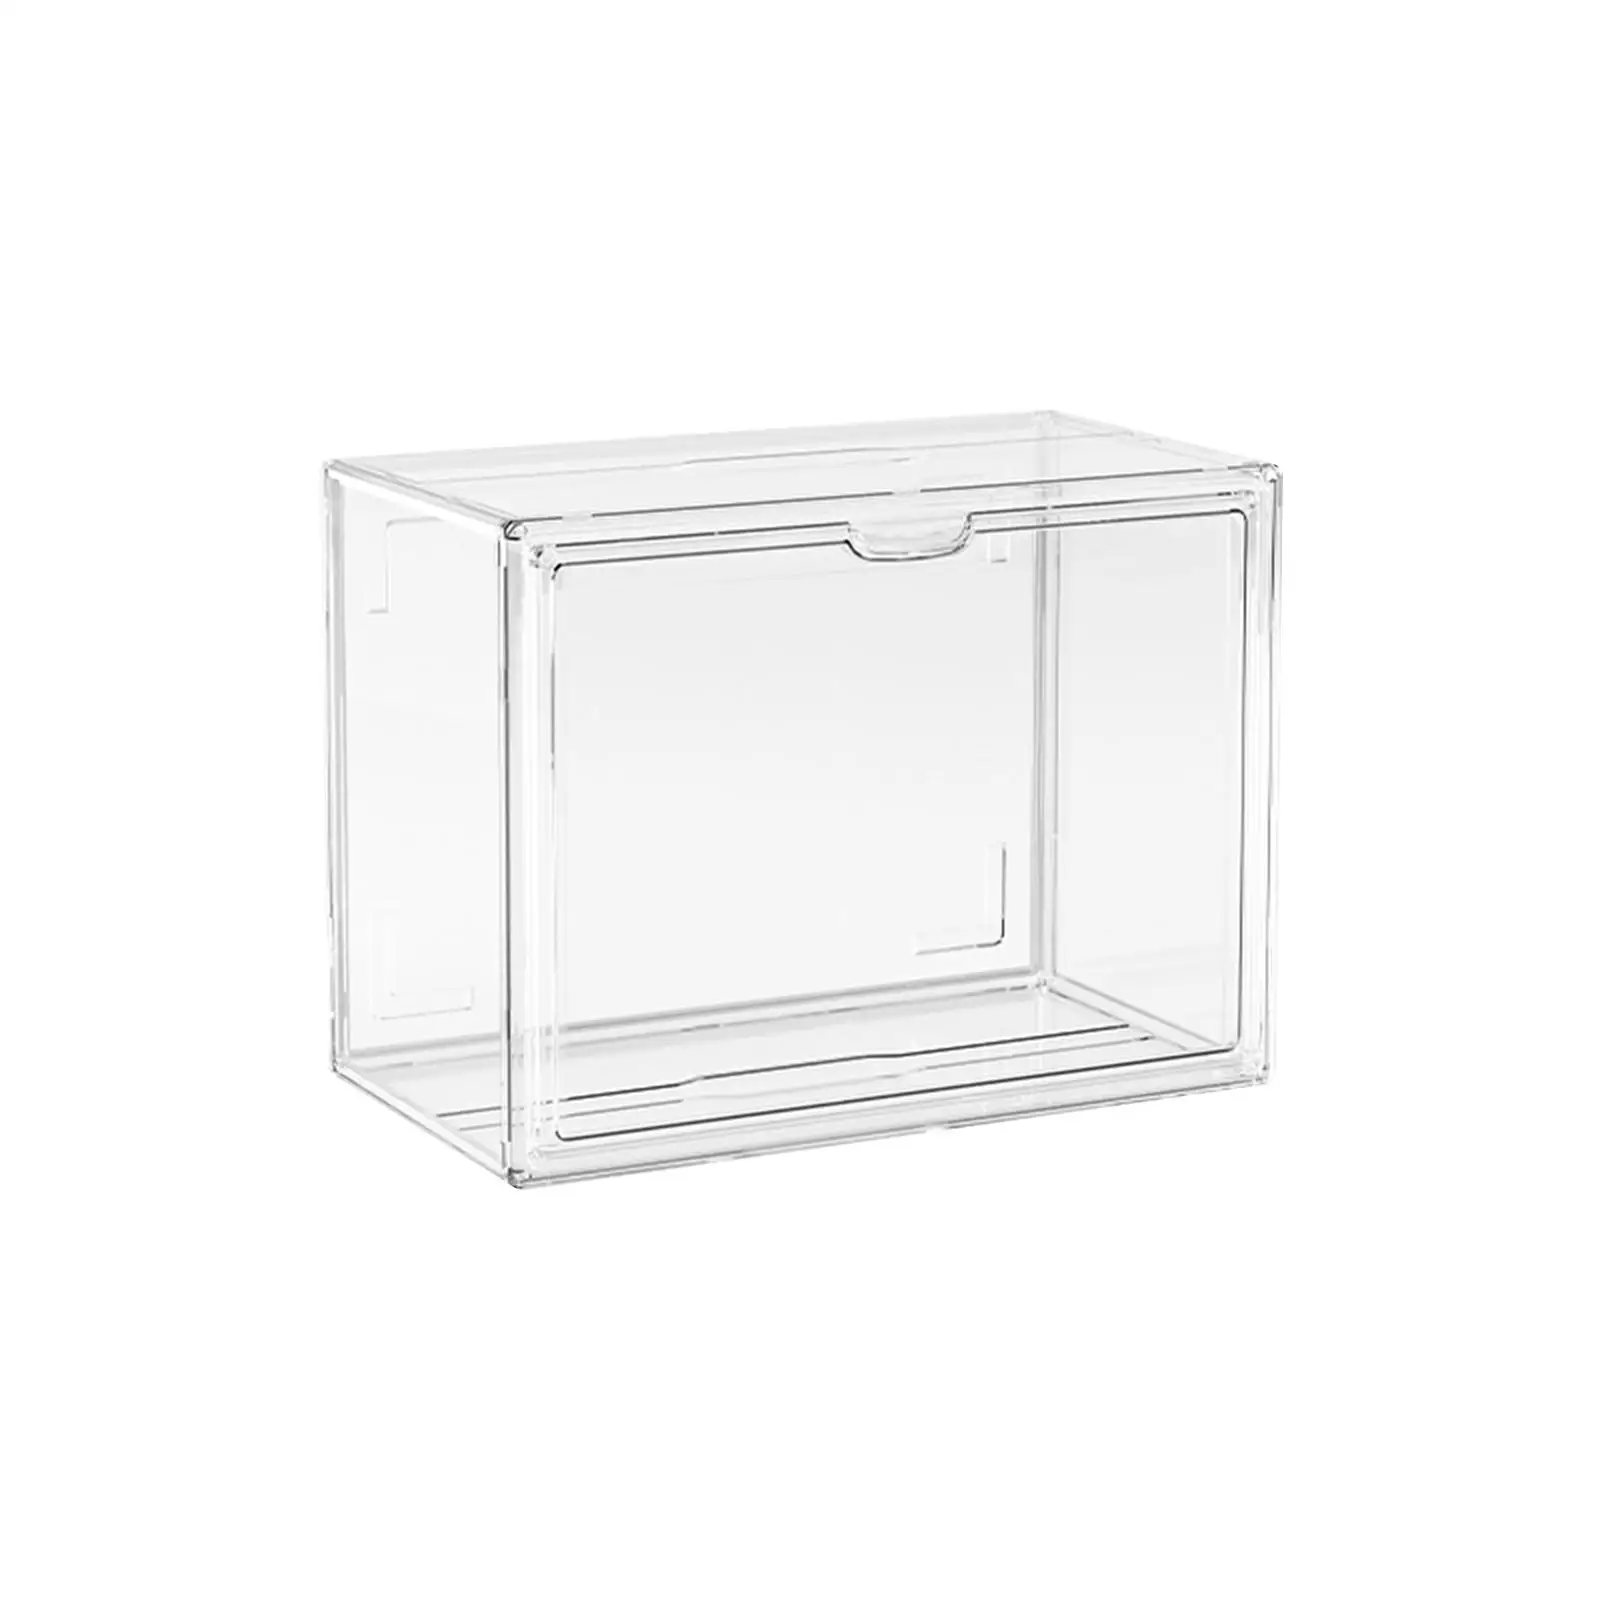 Display Case Dustproof Storage Holder Display Box for Collectibles Action Figures